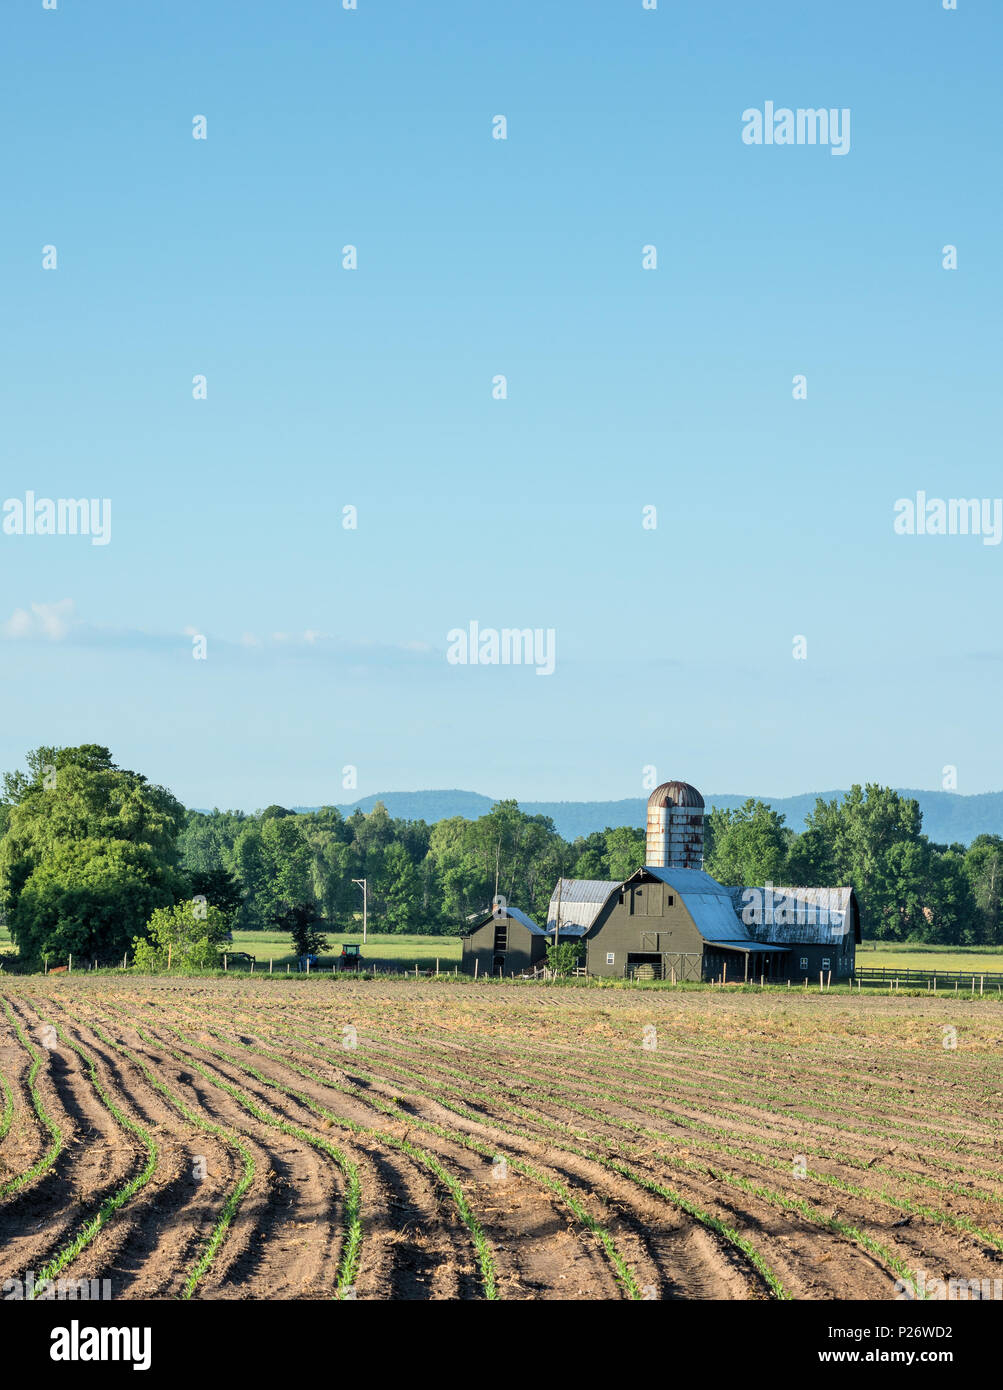 Small farm in the north country of upstate, NY Stock Photo